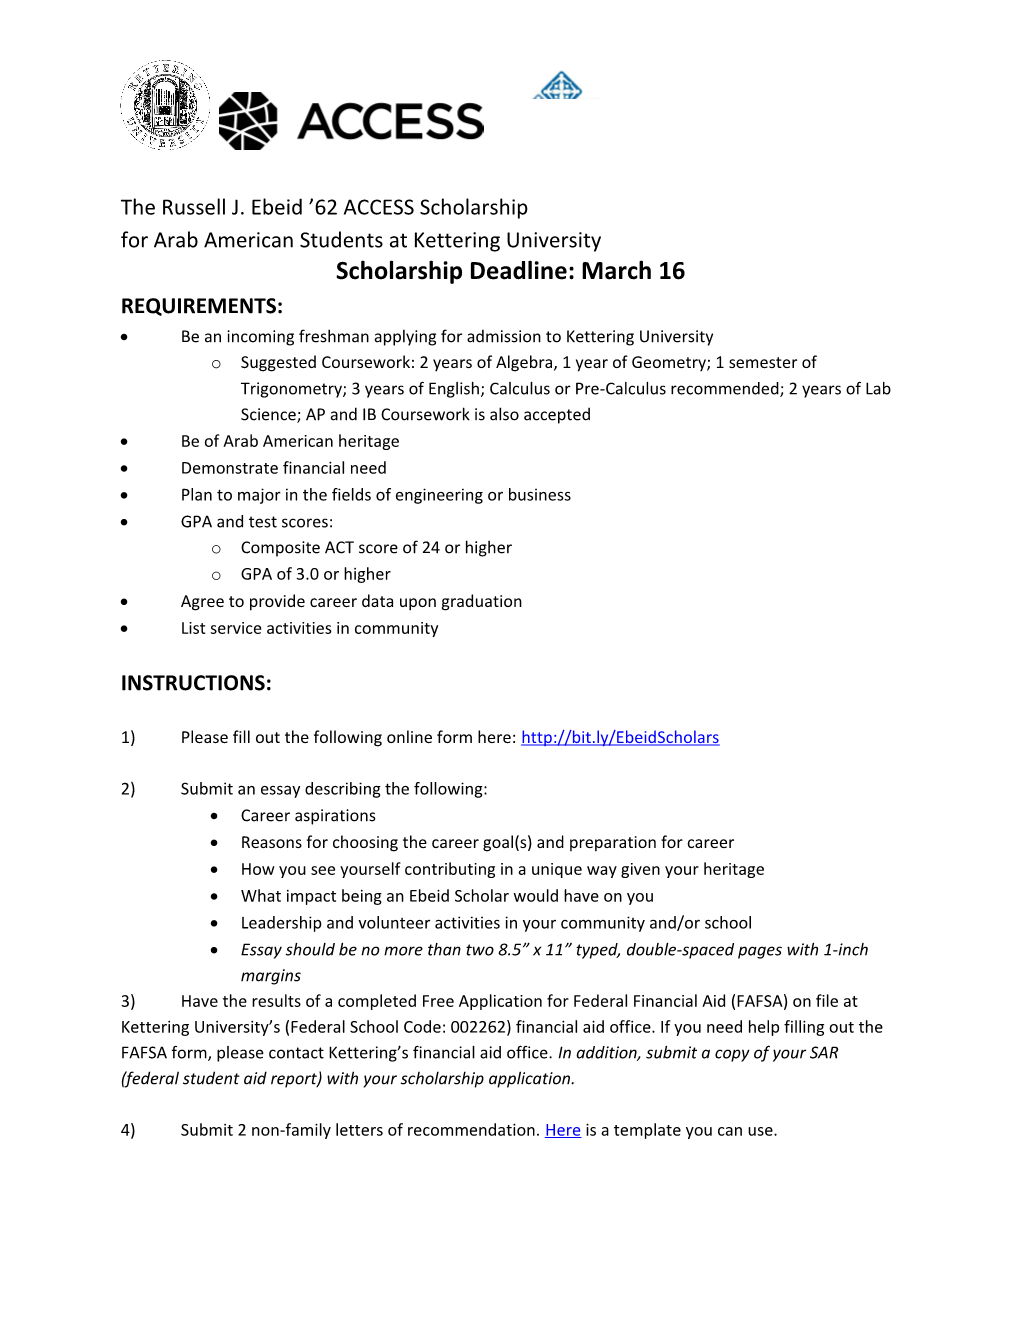 The Russell J. Ebeid 62 ACCESS Scholarship for Arab American Students at Kettering University